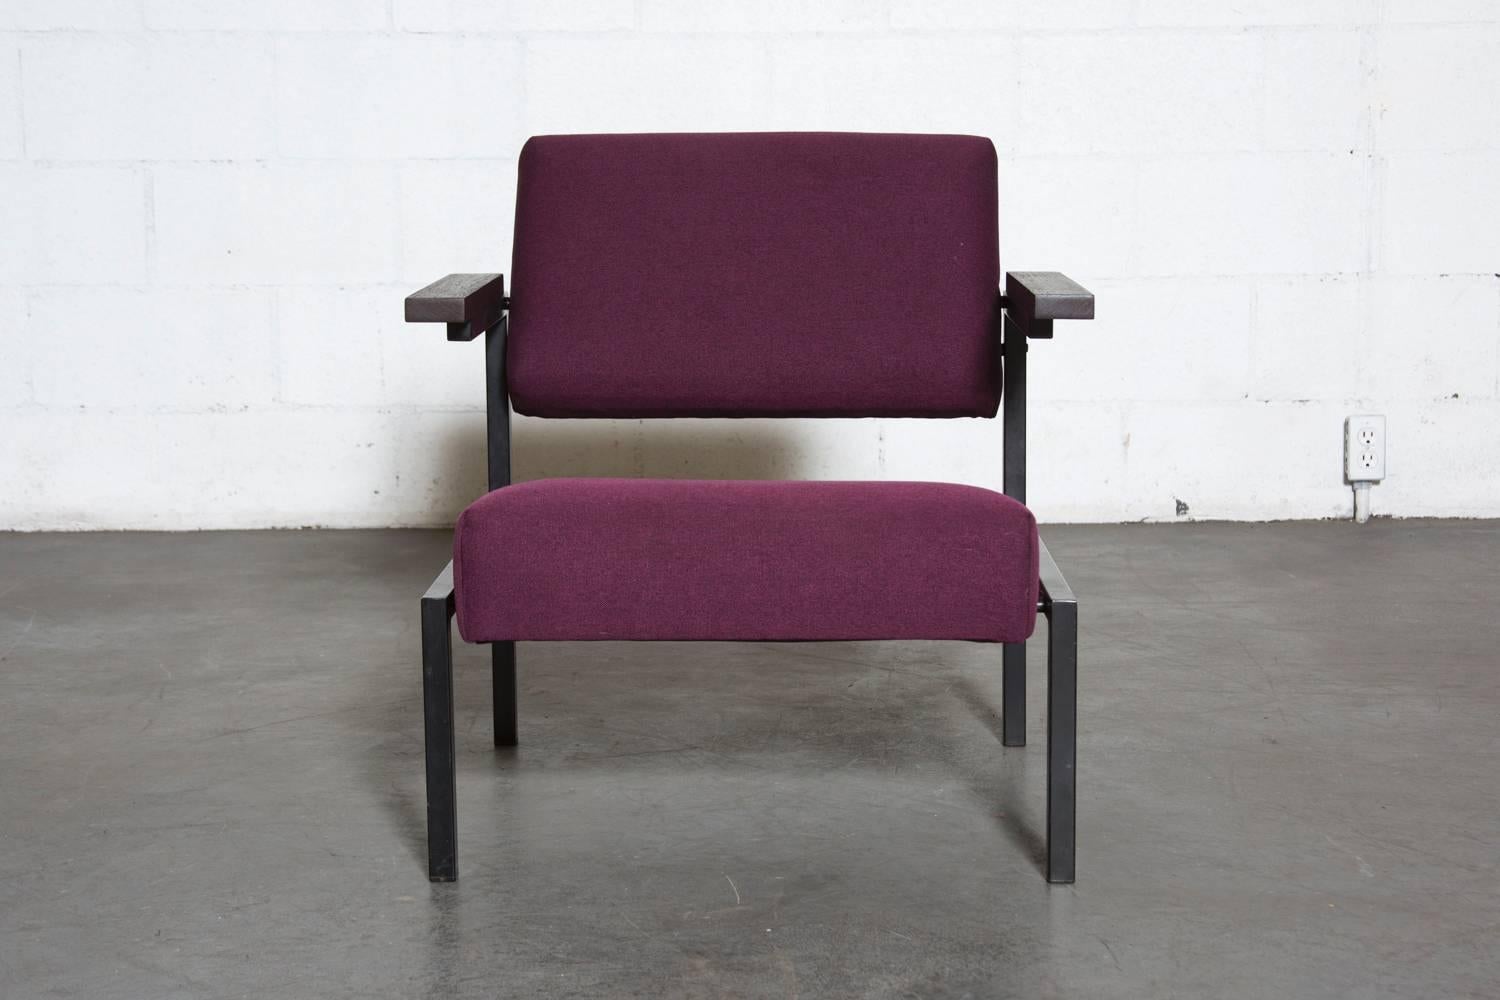 This Black Enameled Metal Frame Lounge Chair with Outreaching Wenge Arm Rests, Re-upholstered in Grape Fabric is a Classic. Frame is in Original Condition with Some Visible Wear to the Enamel, Newly Reupholstered. 

Martin Visser began working for